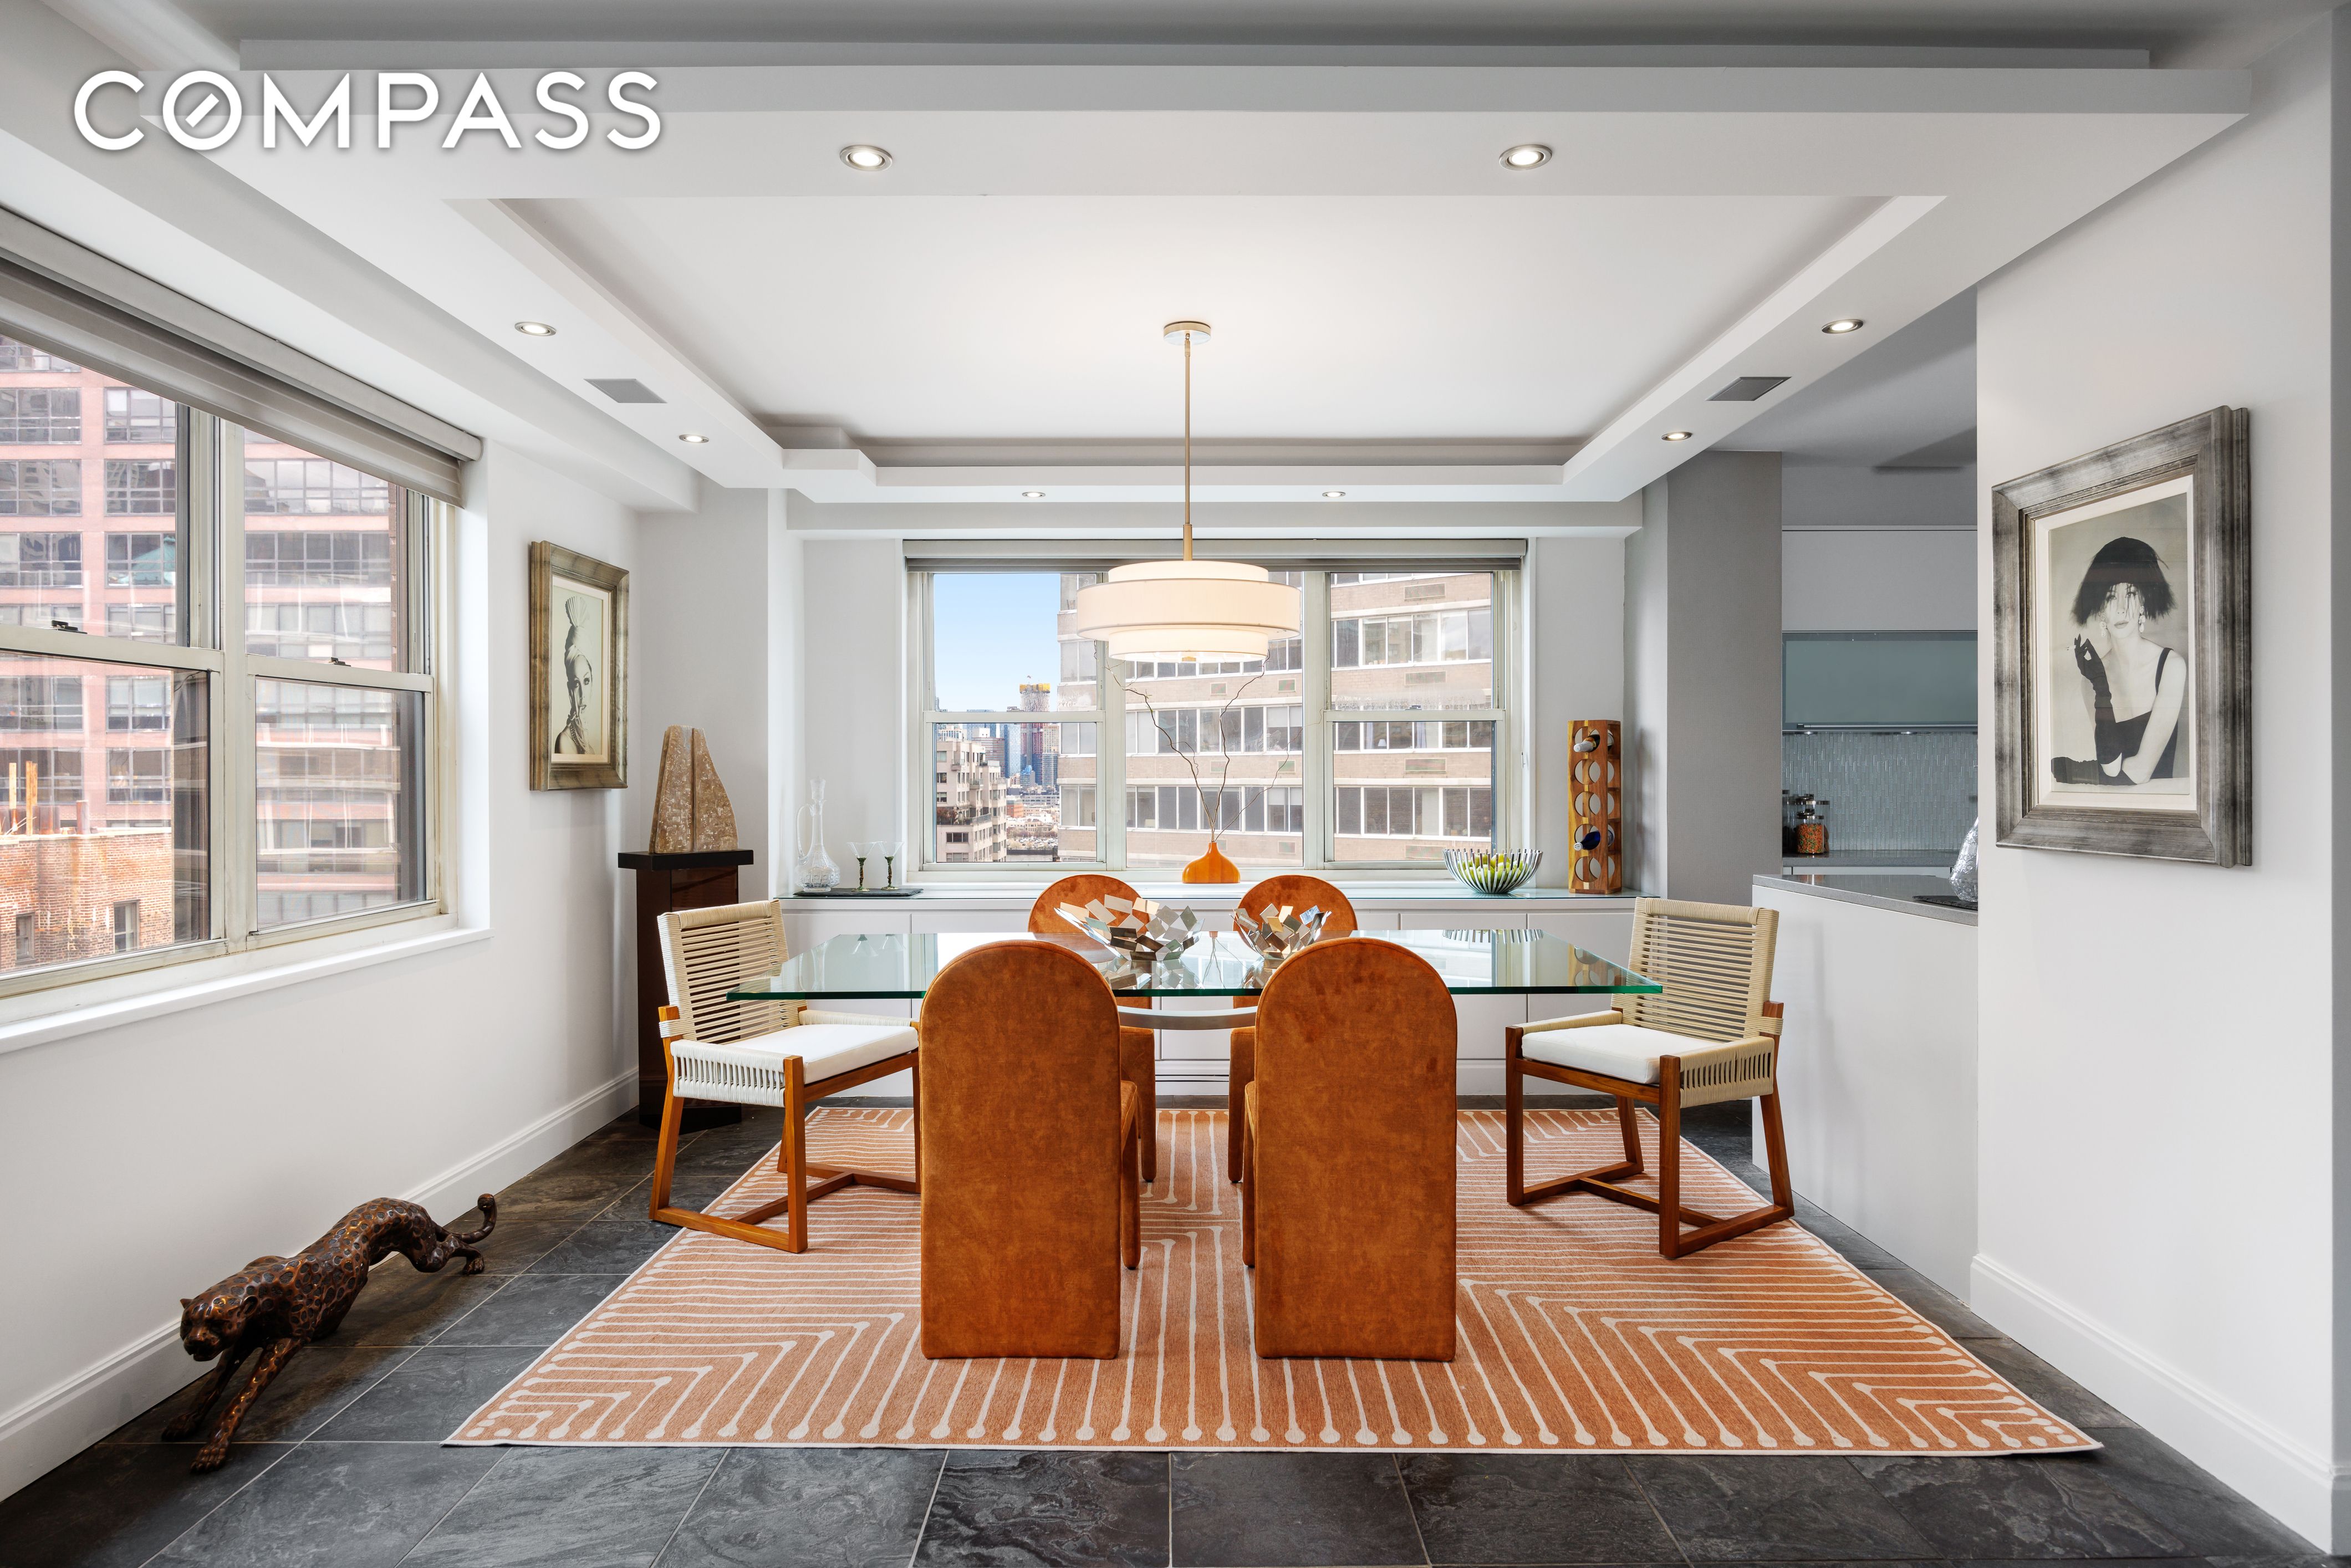 400 East 54th Street 19Efg, Sutton Place, Midtown East, NYC - 5 Bedrooms  
4 Bathrooms  
9 Rooms - 